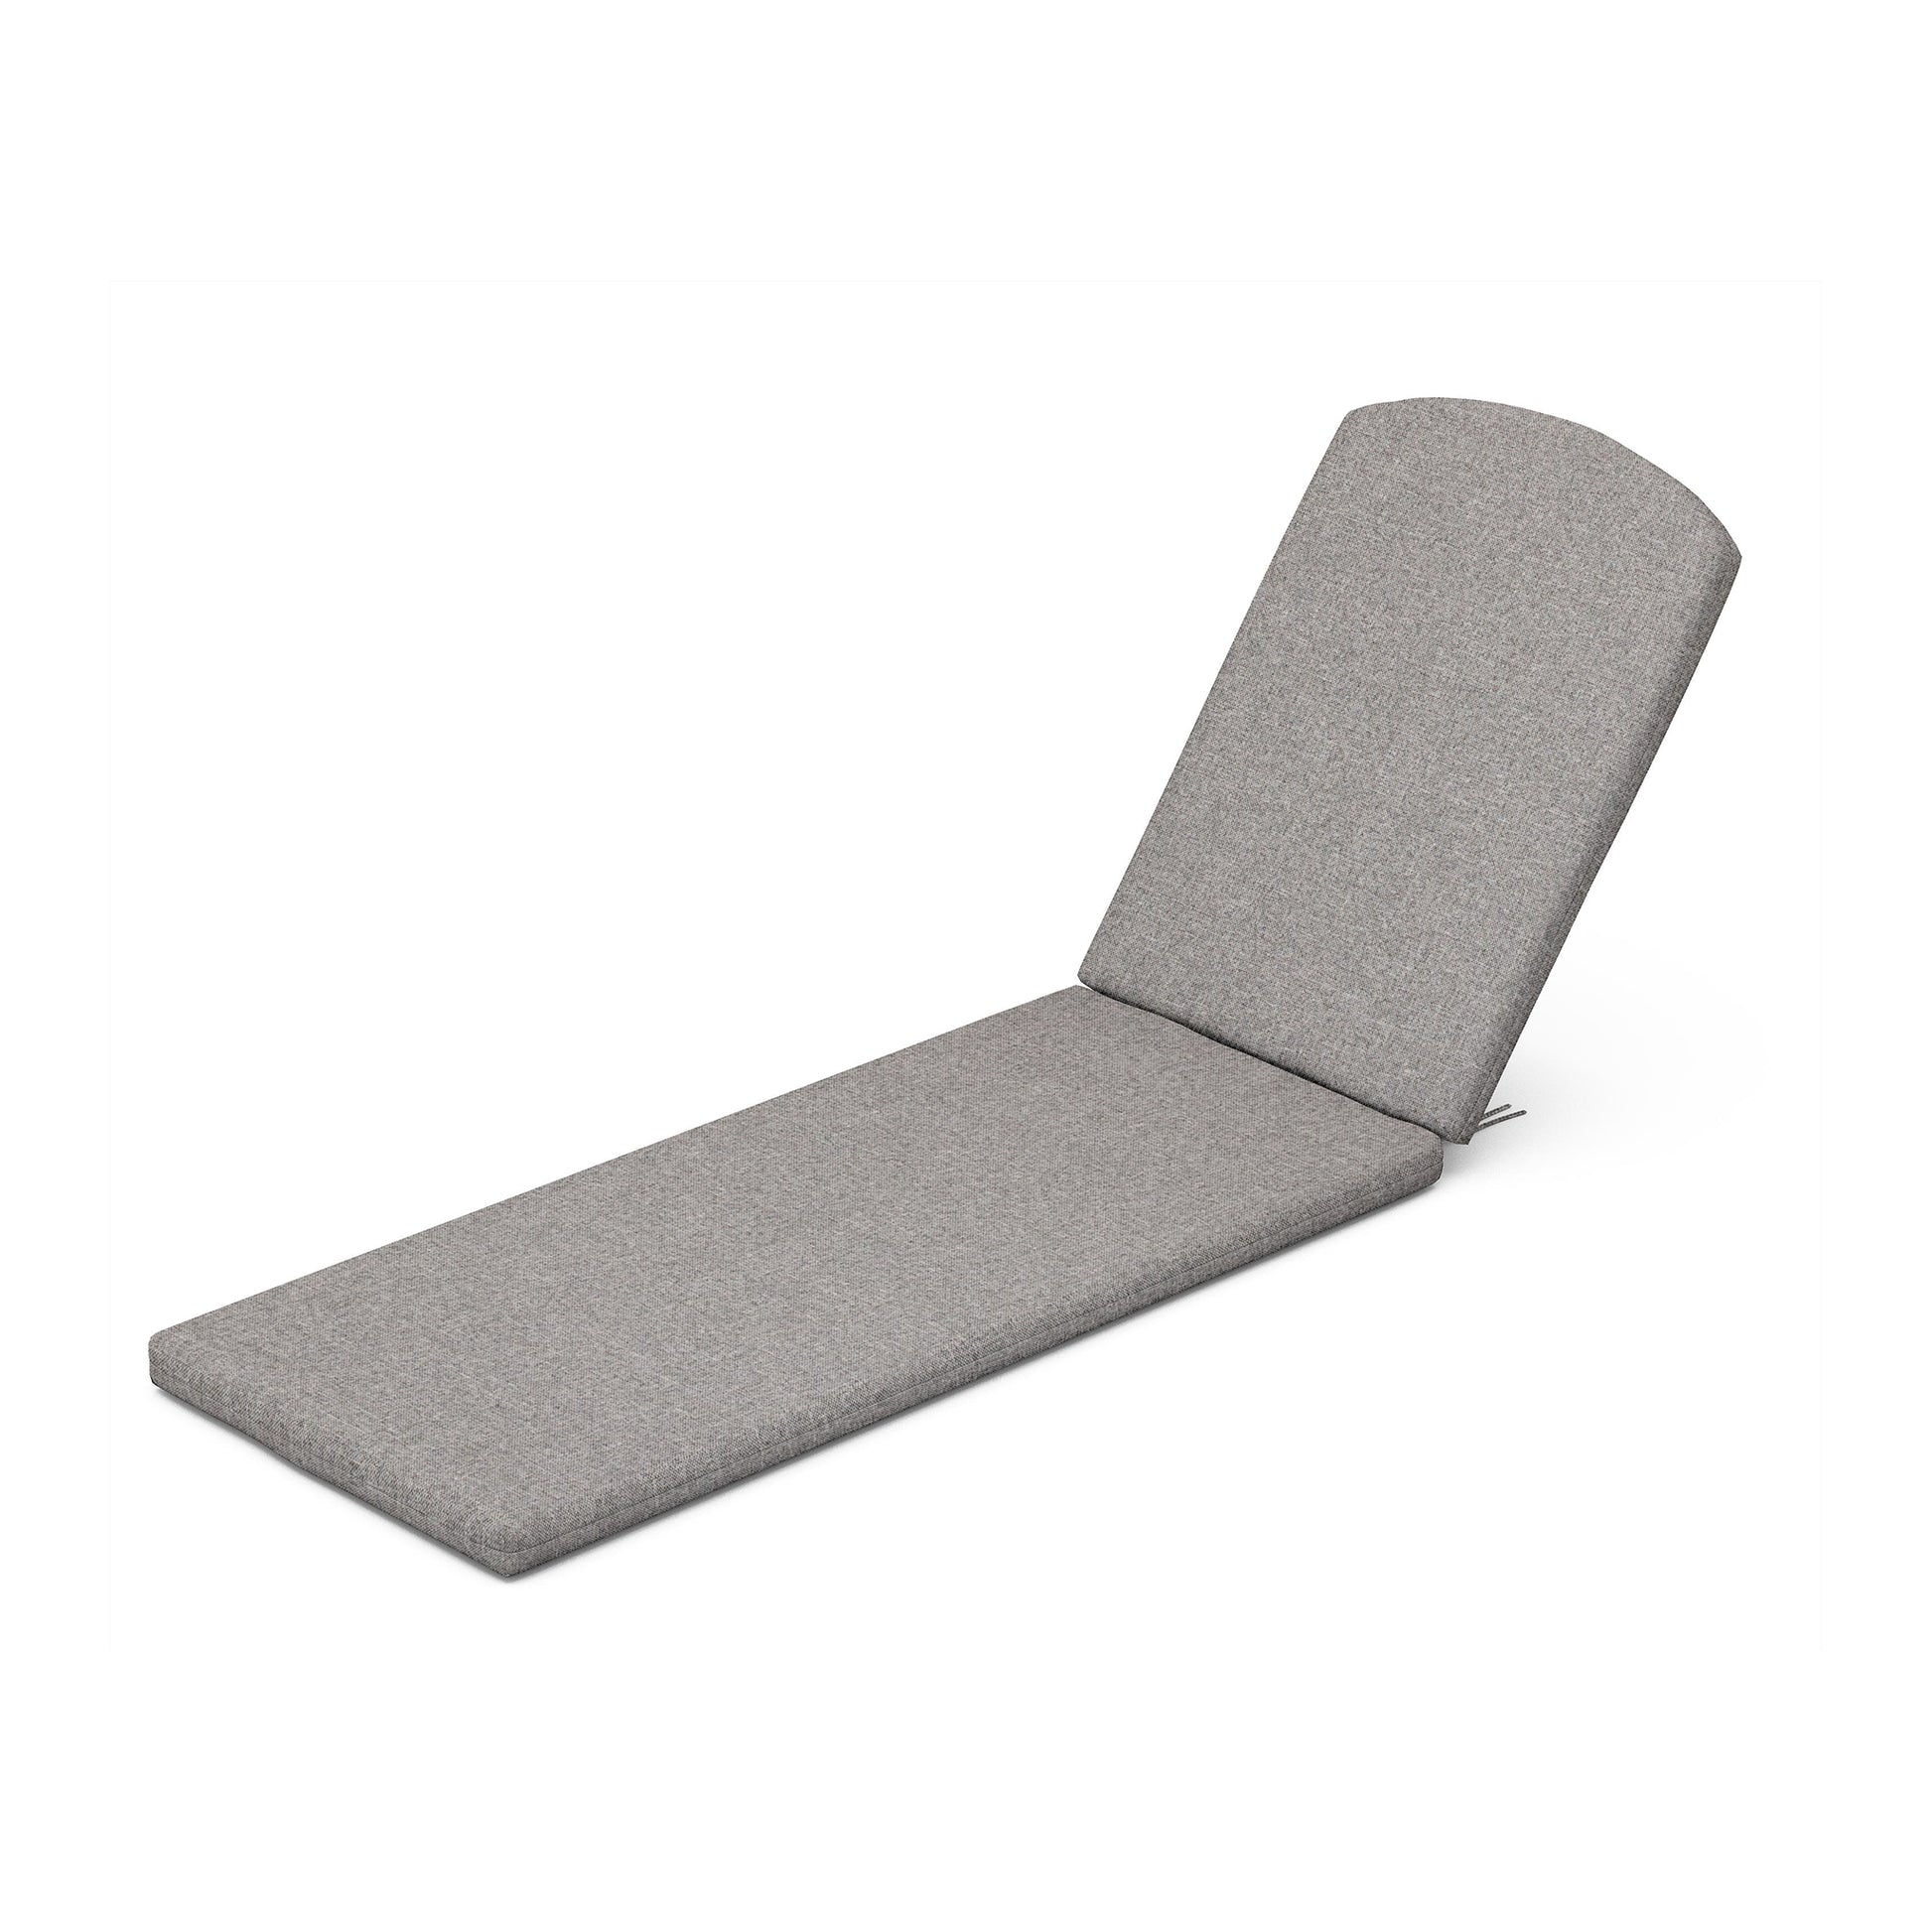 A grey chaise lounge with POLYWOOD's XPWF0004 - Full Seat Cushion on a white background.